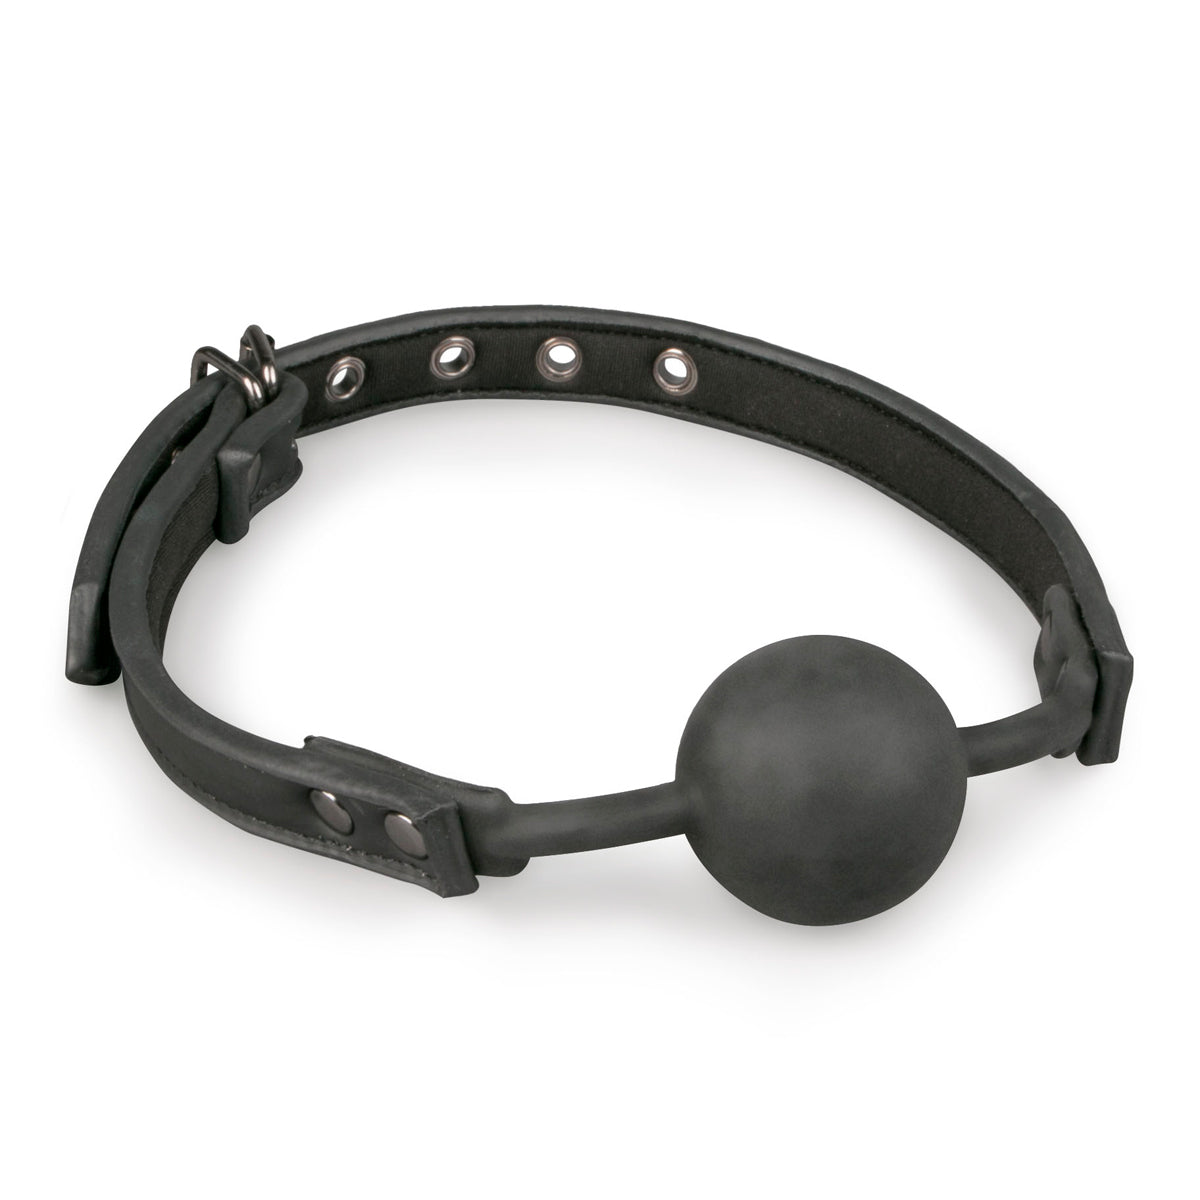 Ball Gag With Silicone Ball - Just for you desires